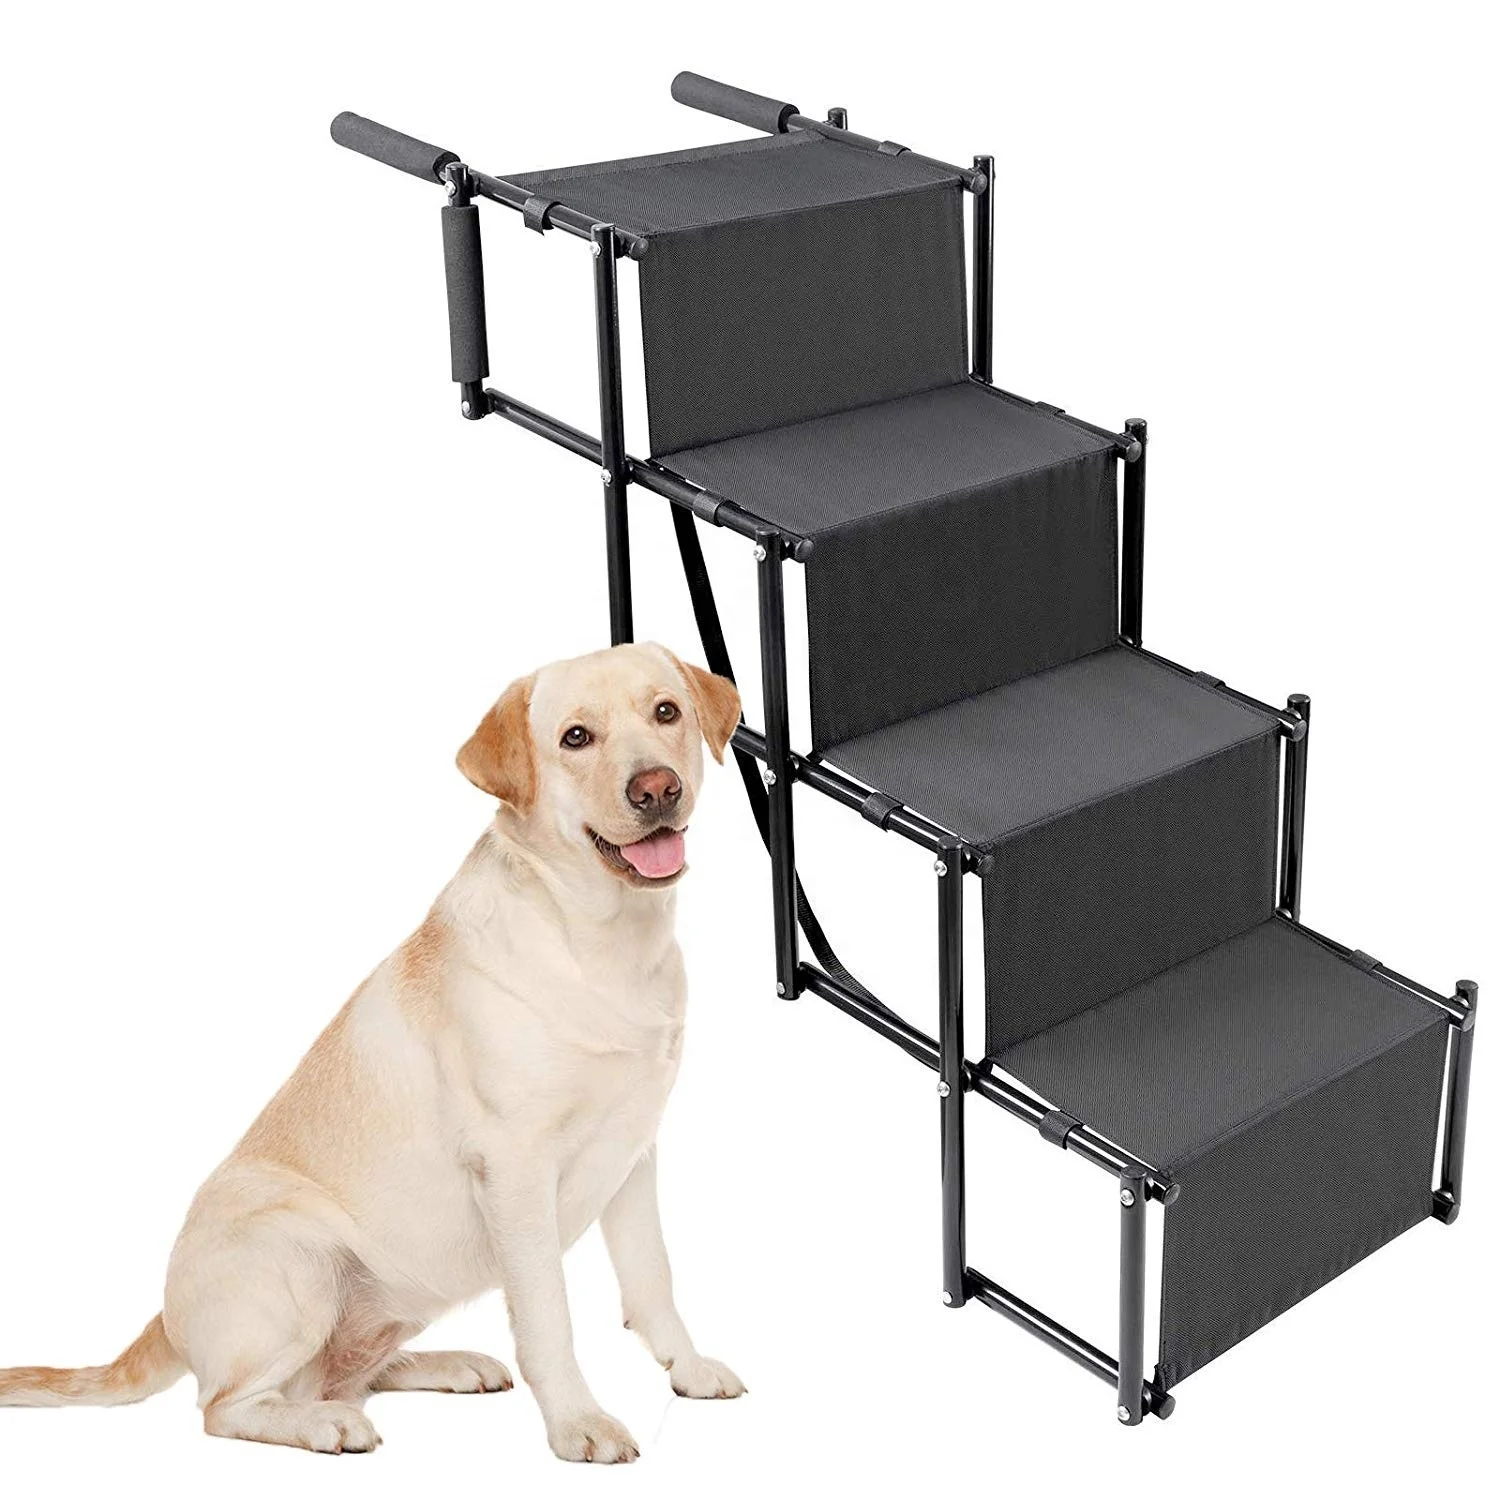 

Sohpety Outdoor Fortable Foldable Folding Pet Dog Car Bed Ramp Stairs Steps For Dogs Car Bed, Black/gray